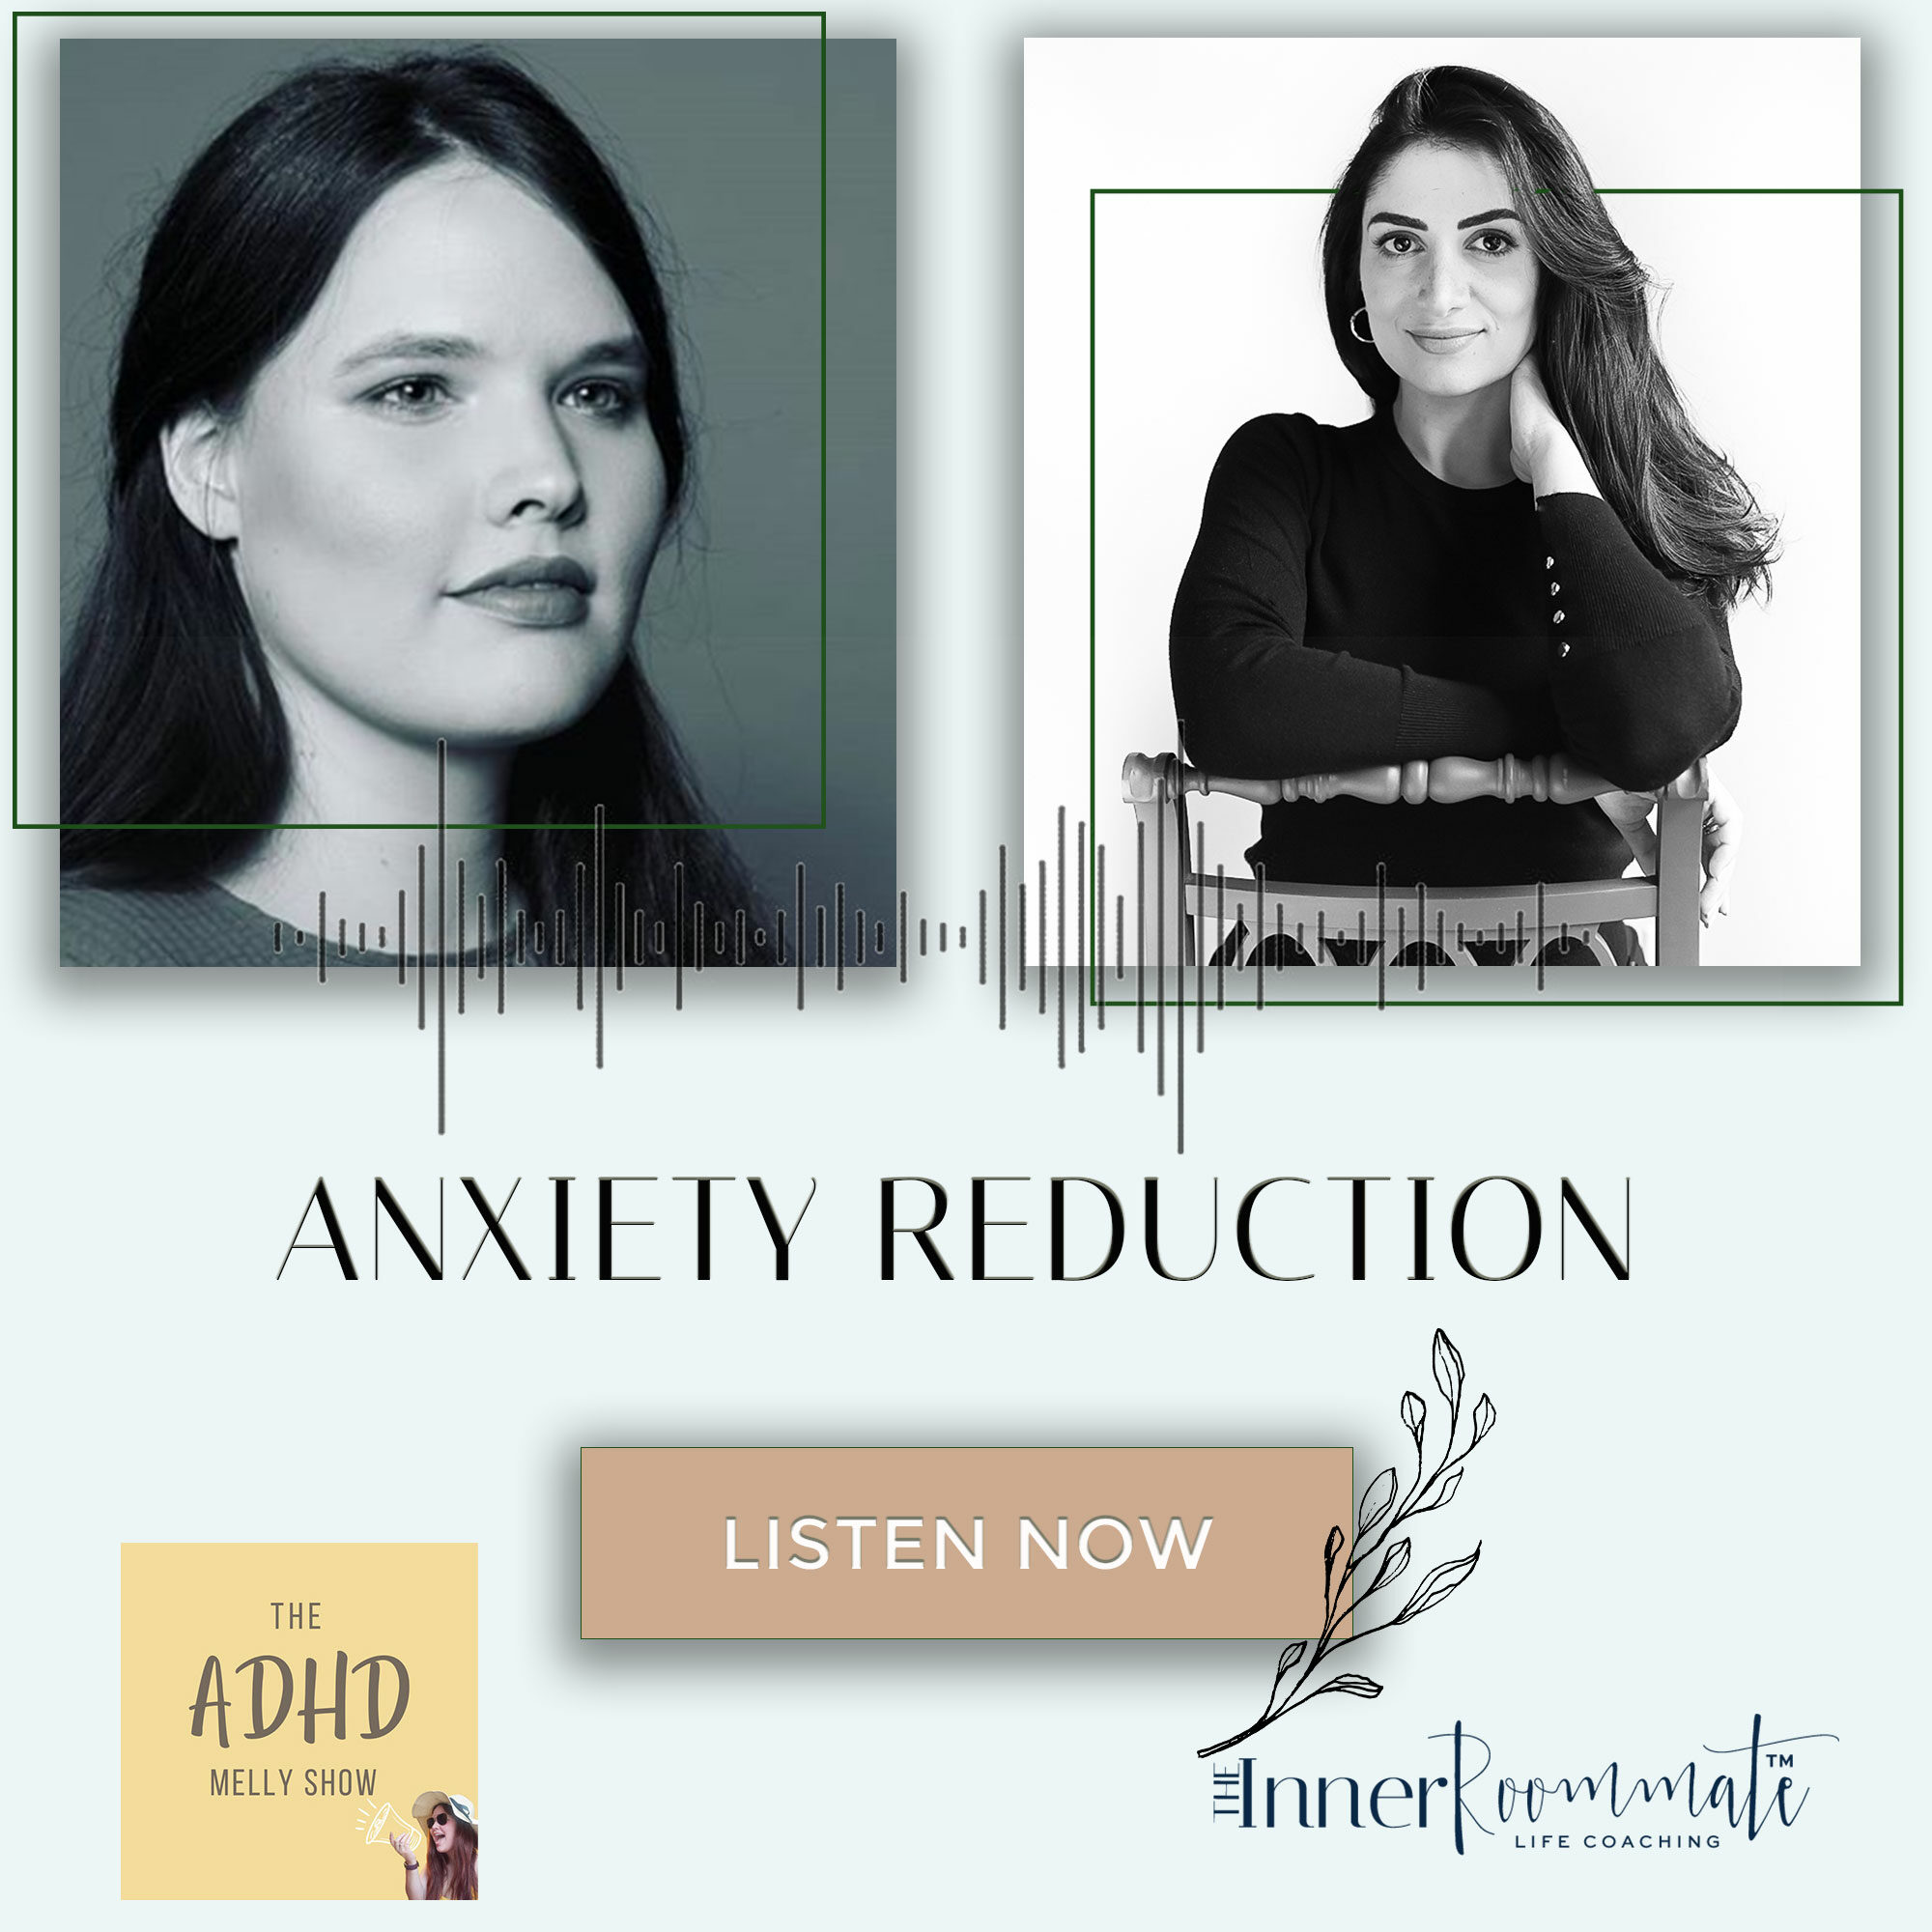 Listen in on this episode where I give helpful anxiety reduction tips. 